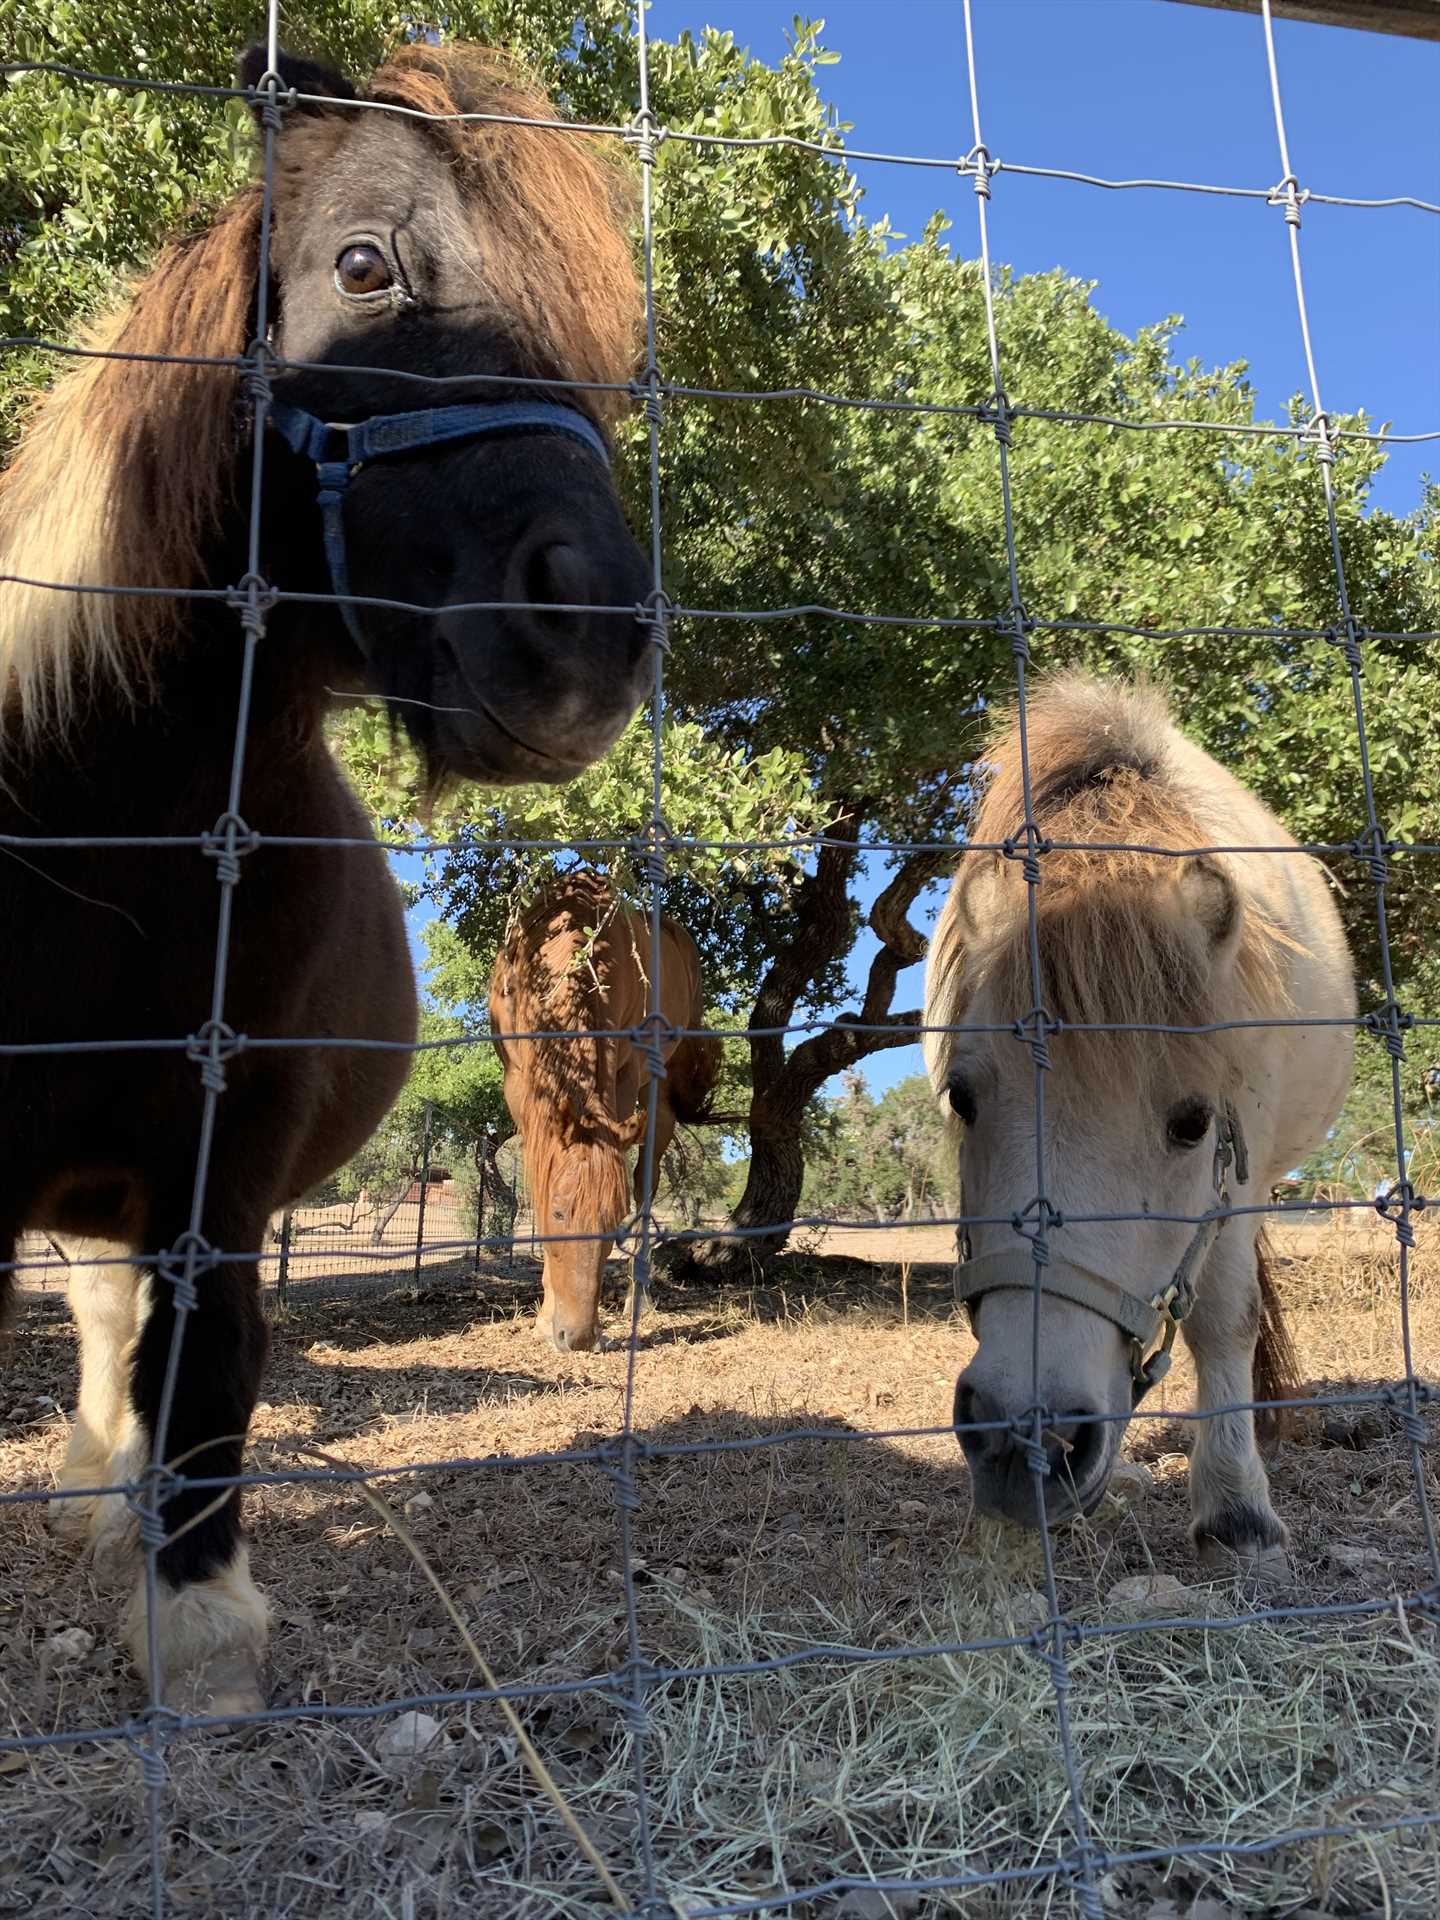                                                 Buttercup and Jelly Bean are rescued miniature horses who have found a comfortable forever home on Tabasco Ranch.